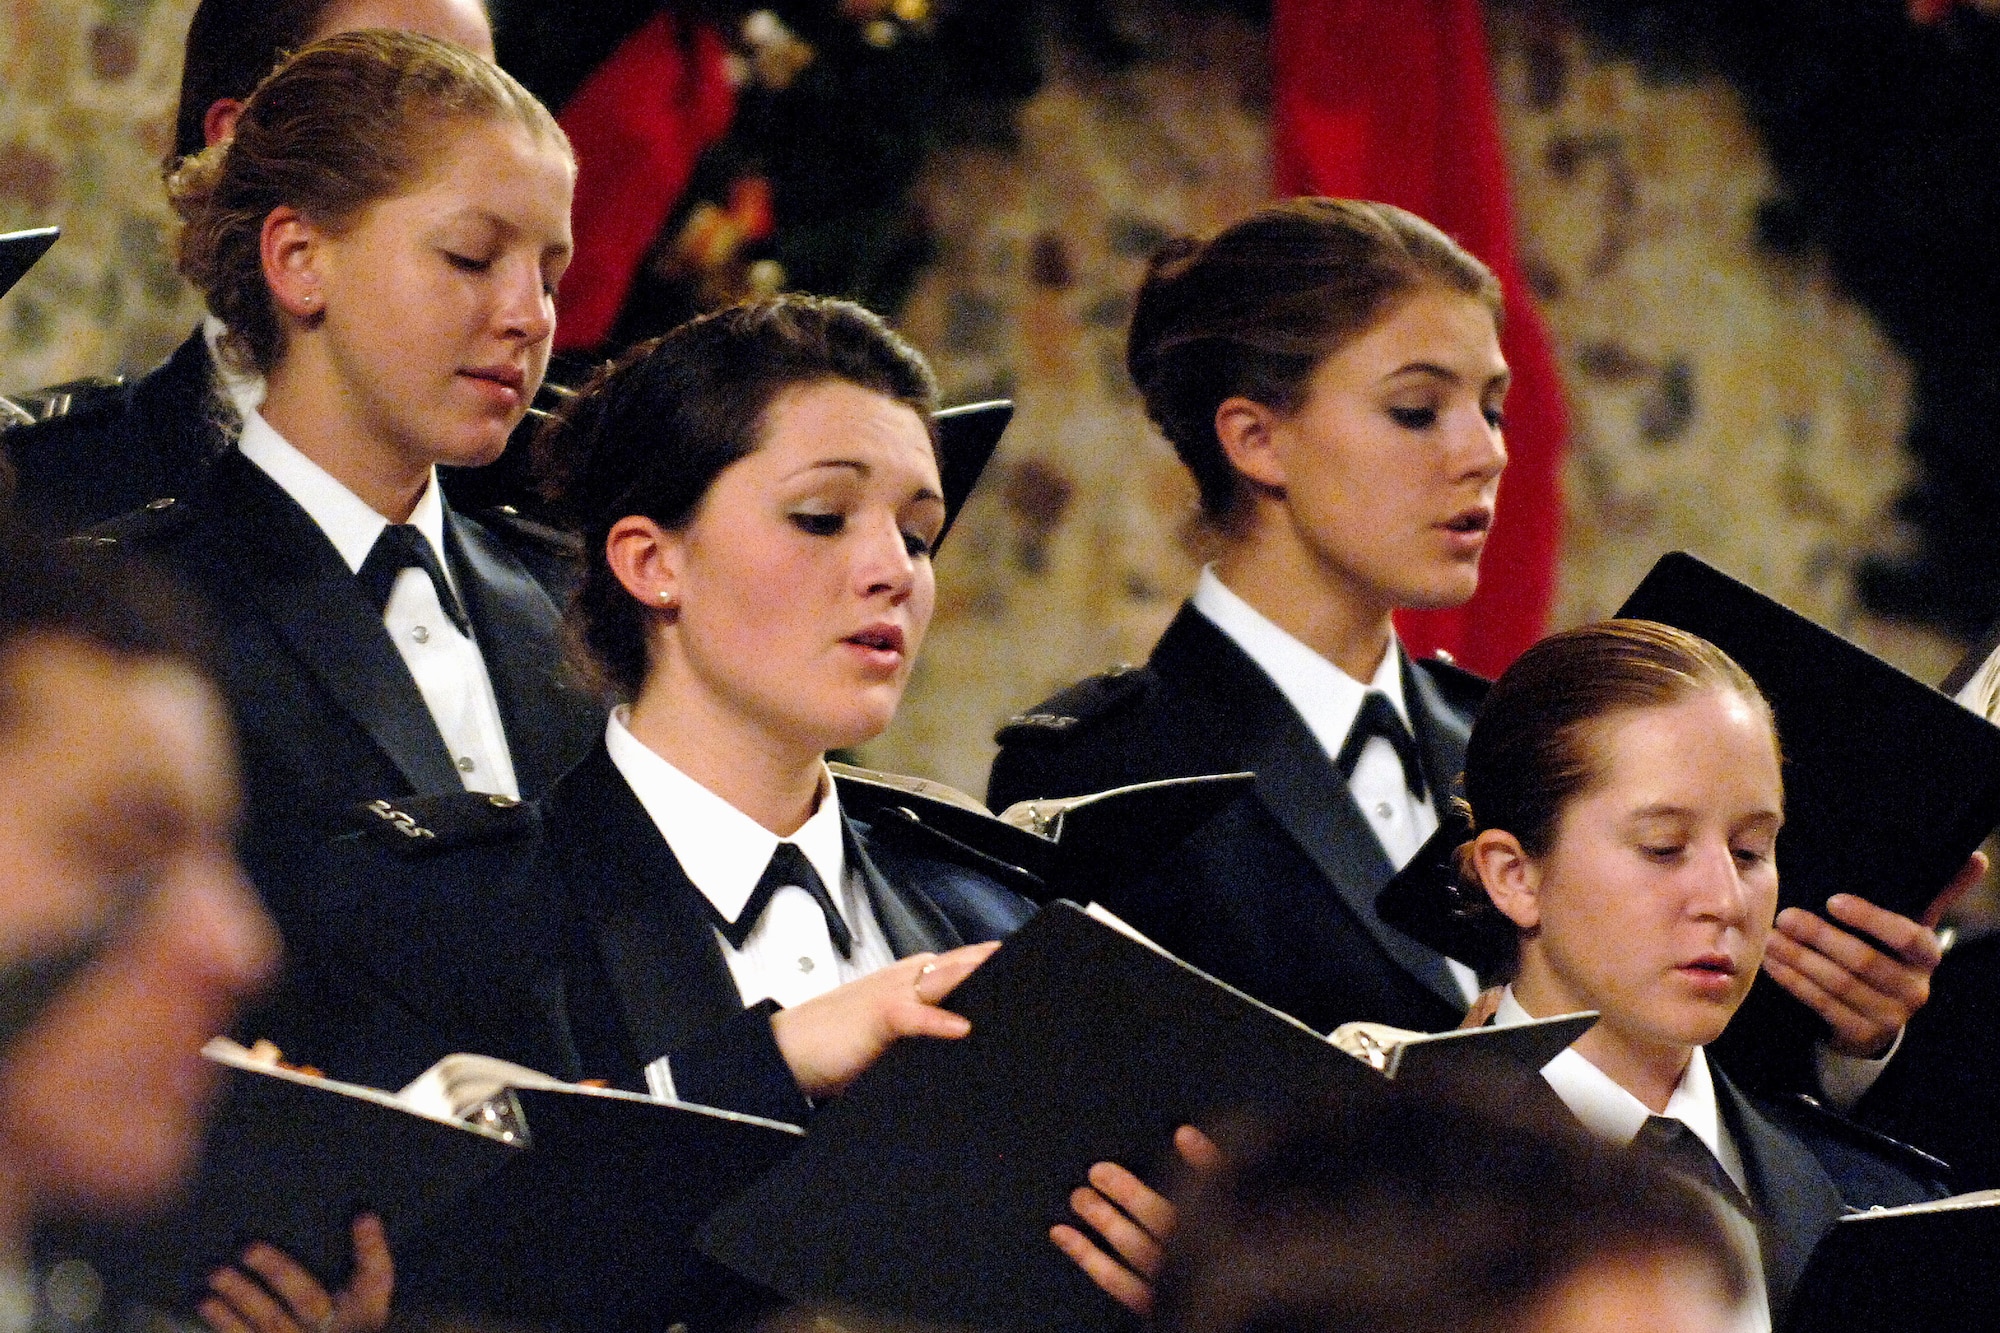 Cadets perform during the annual U.S. Air Force Academy's "Messiah" concert Dec. 8 at the Cadet Chapel in Colorado Springs, Colo. The Cadet Chorale is the academy's premiere choral organization. (U.S. Air Force photo/Mike Kaplan)